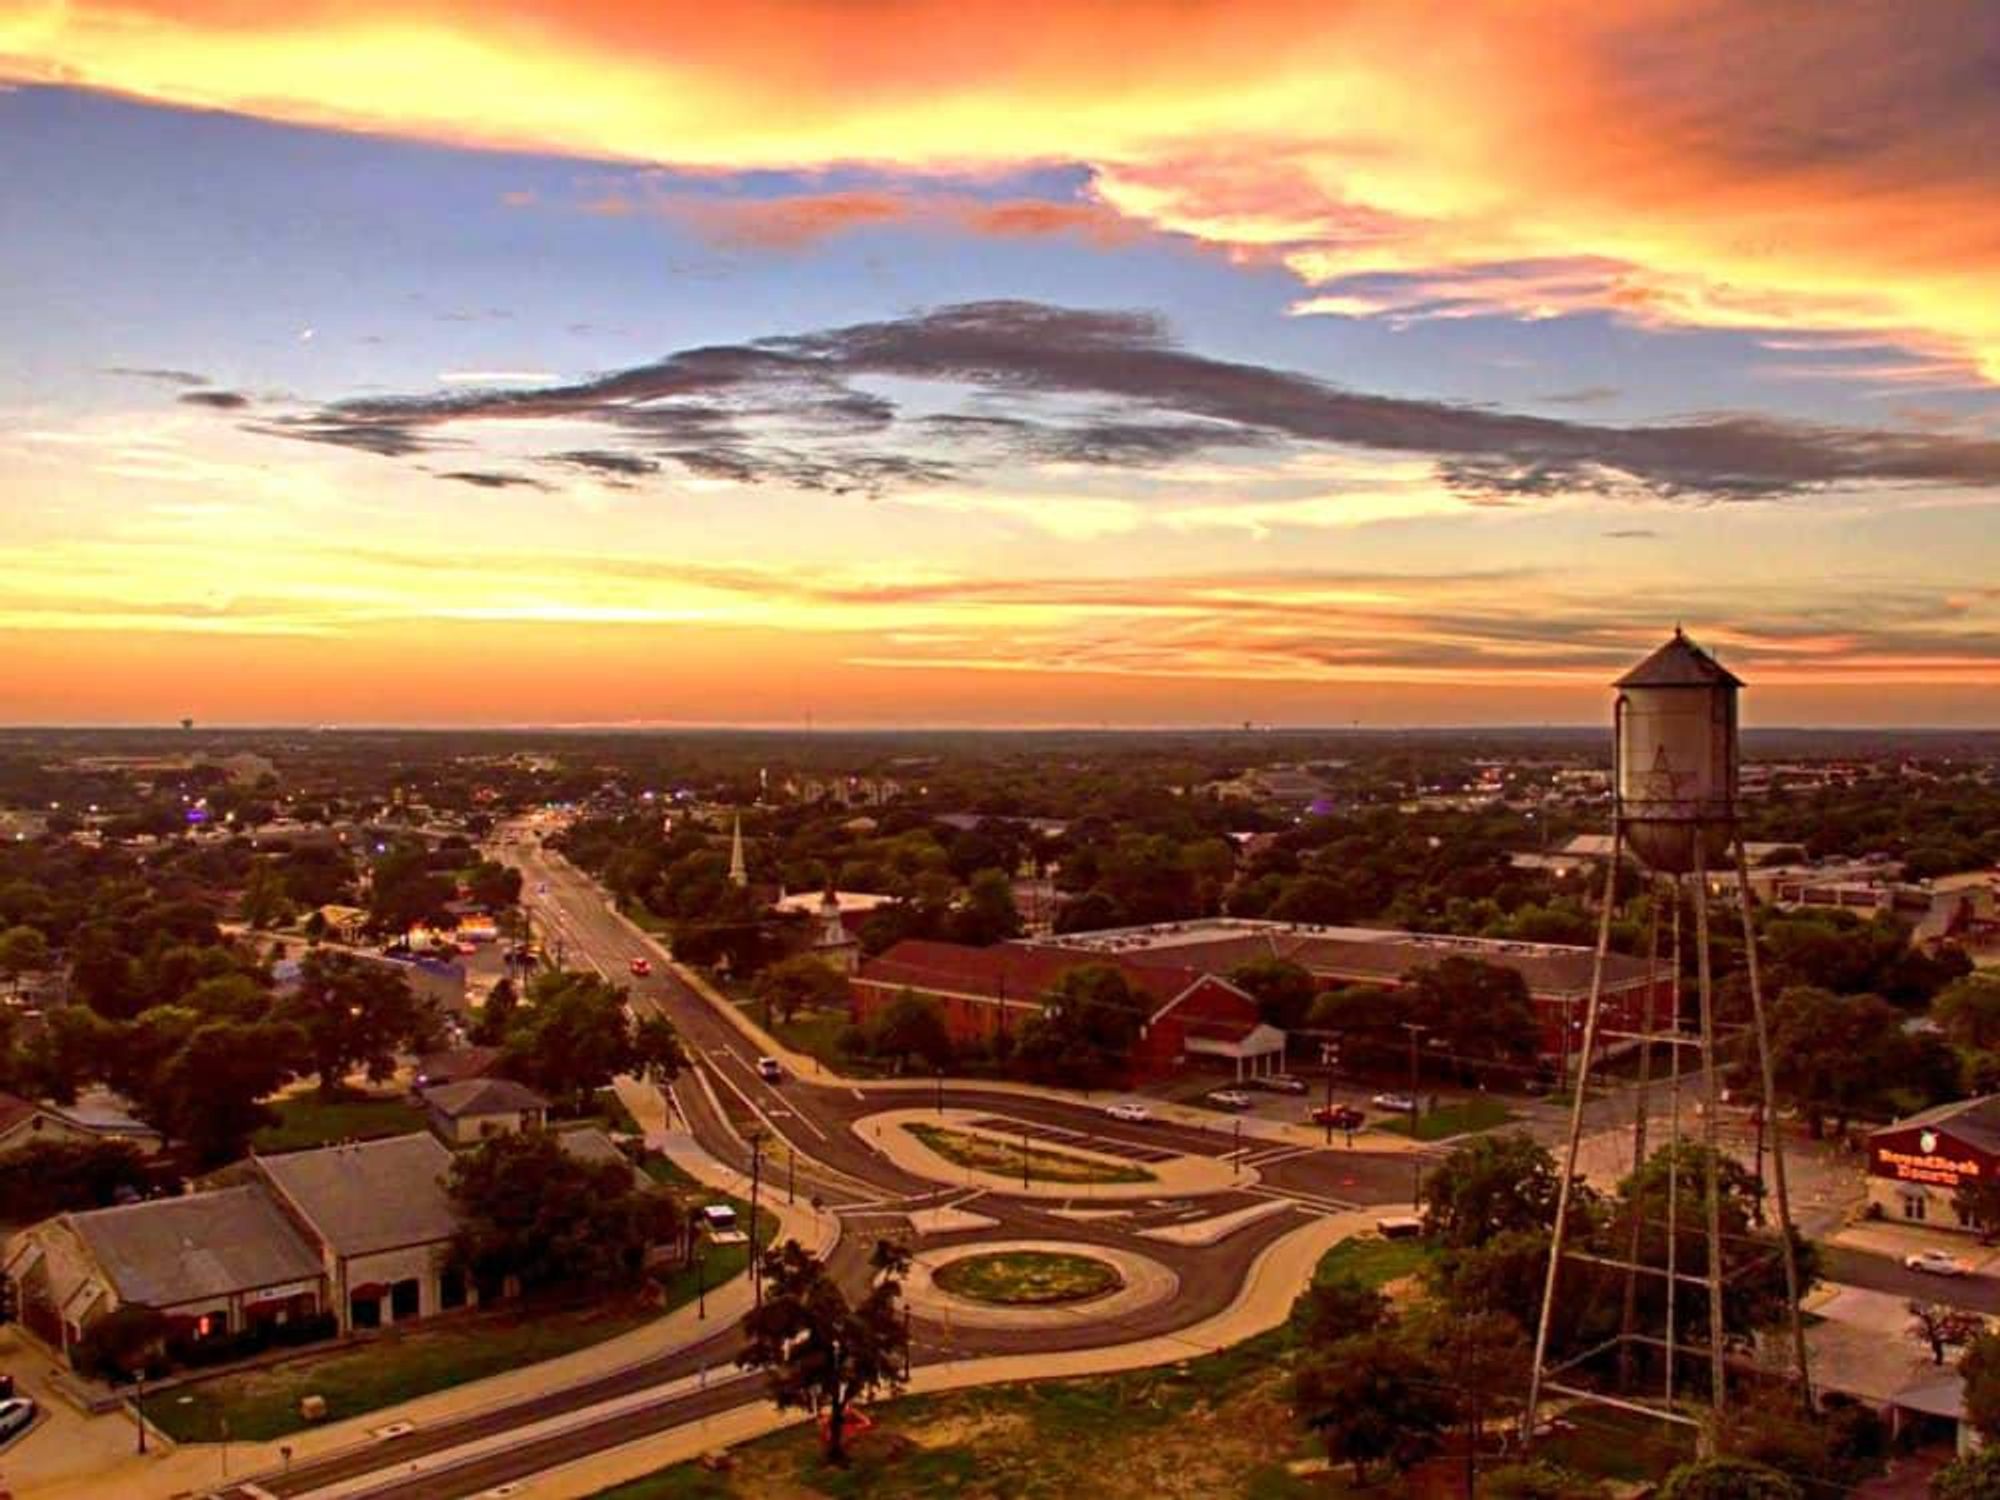 Best cities to buy a house: The Woodlands, Texas, named tops in U.S.